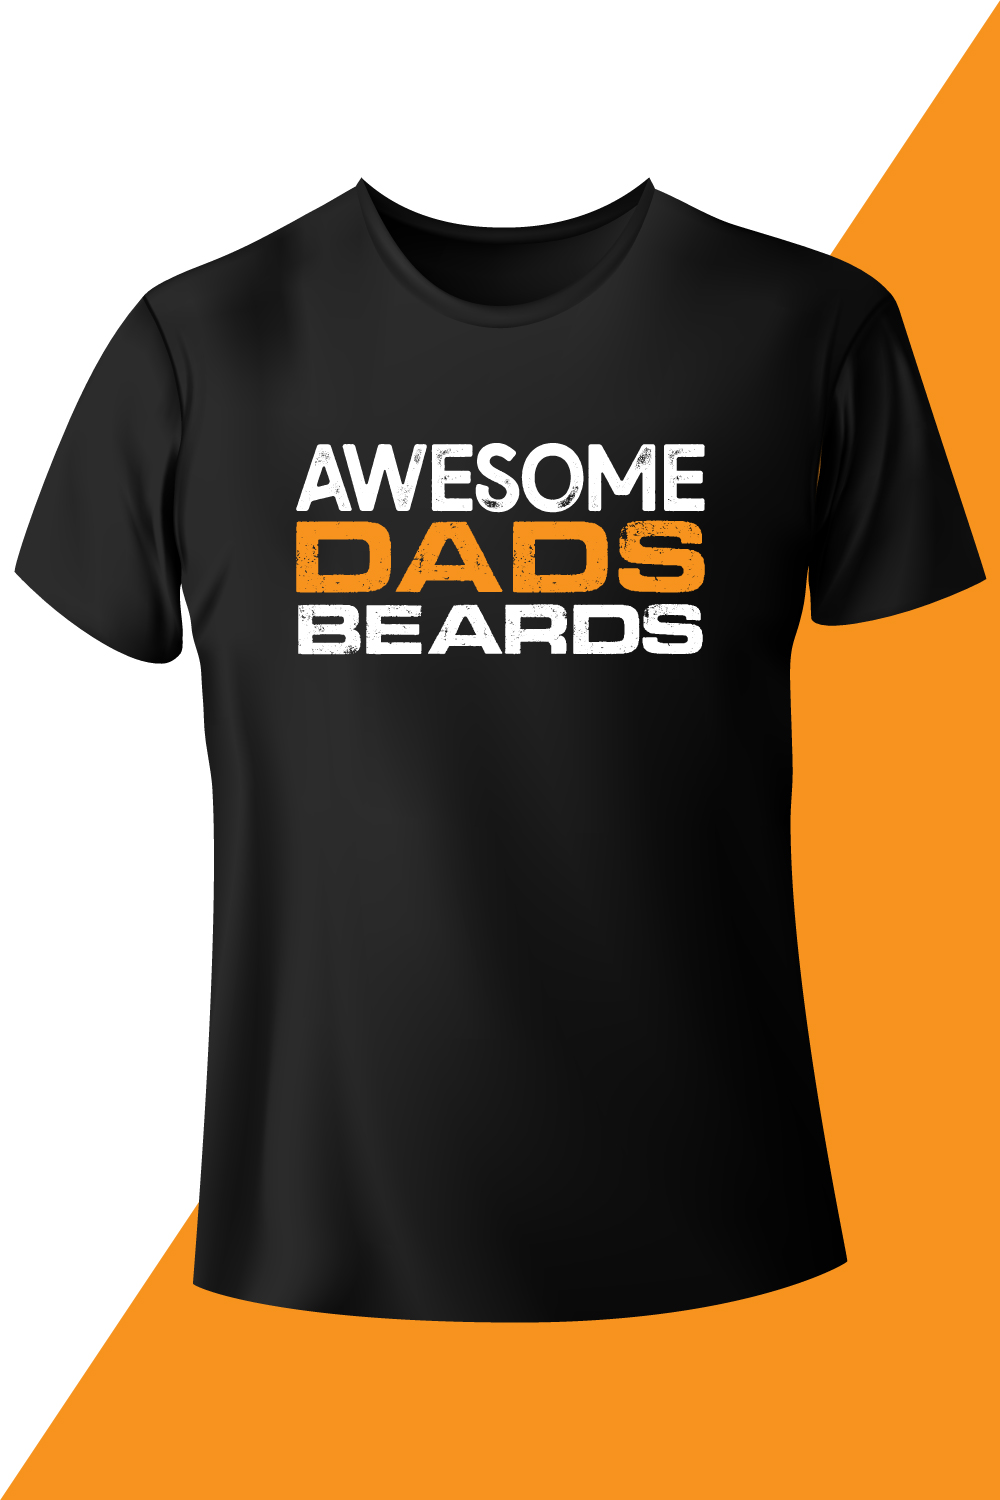 Image with a black t-shirt with an enchanting inscription awesome dads bears.